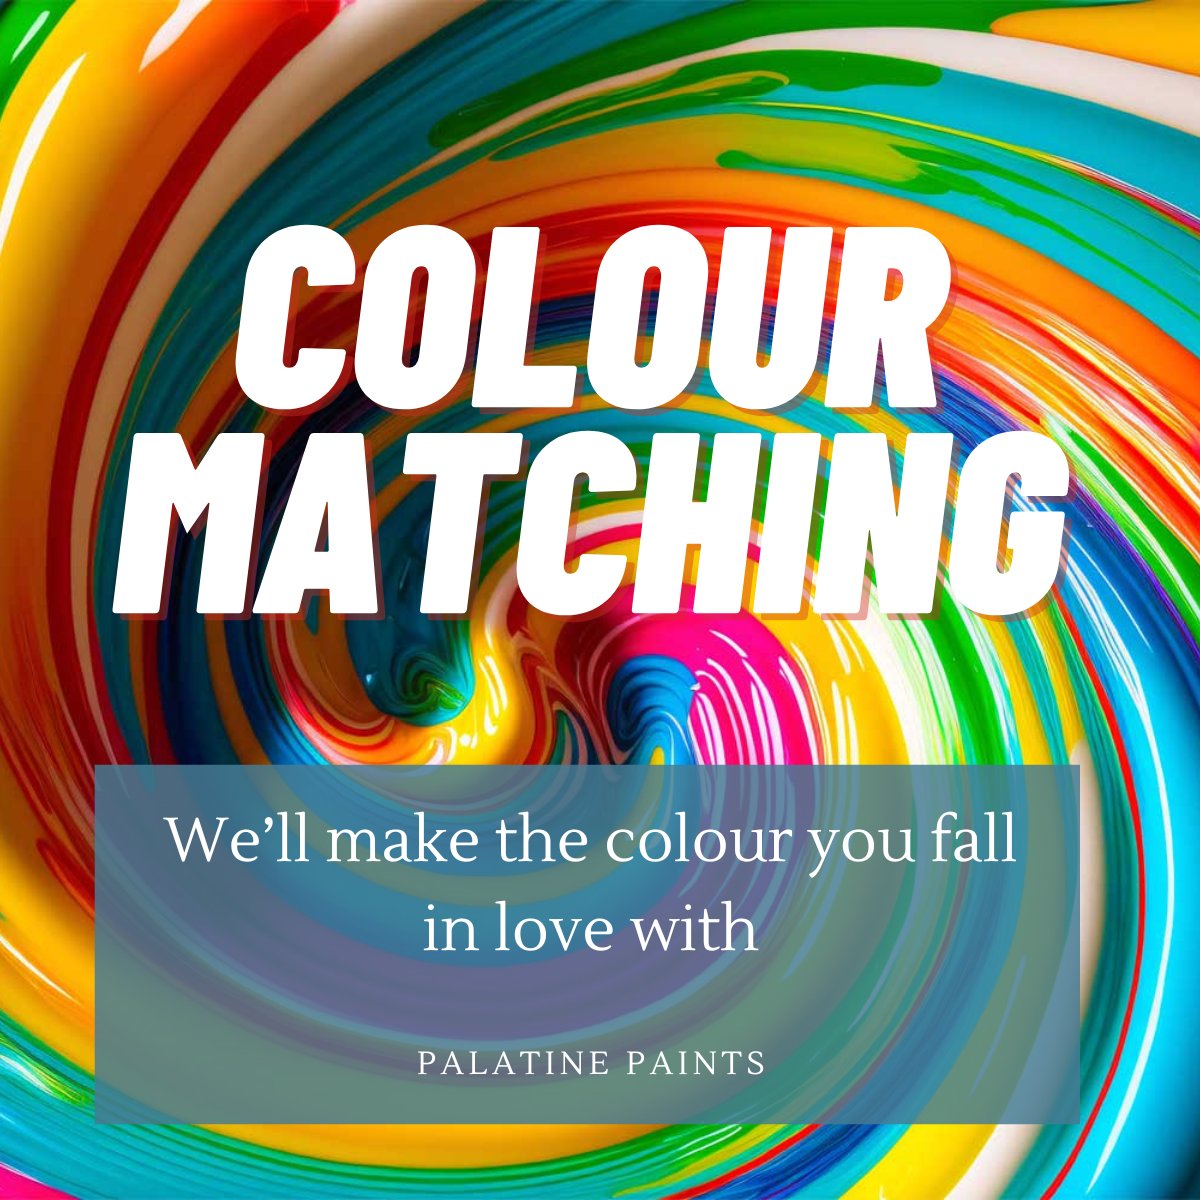 Palatine Paints have been in the industry for over 75 years! 🤩 We know that choosing the right colour for your project is just as important as completing it which is why we offer a colour matching service Read more here: palatinepaints.co.uk/colour-matchin…